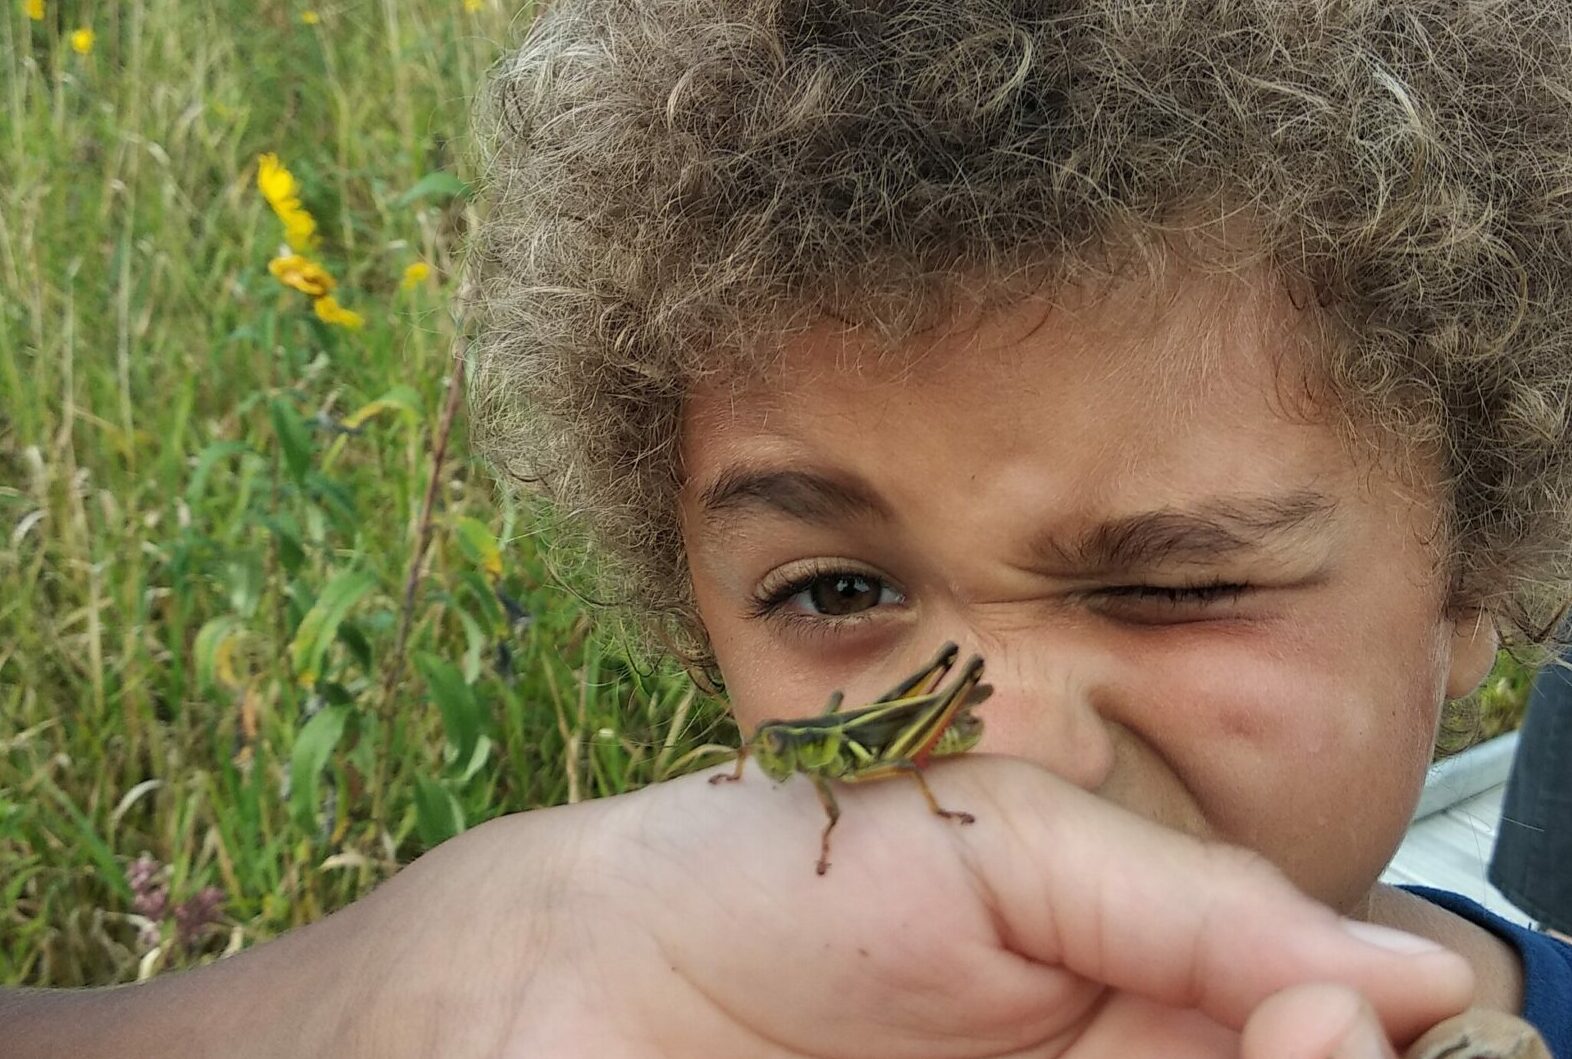 A close up photograph of a young child squinting to look at a grasshopper that an adult holds in their hand.